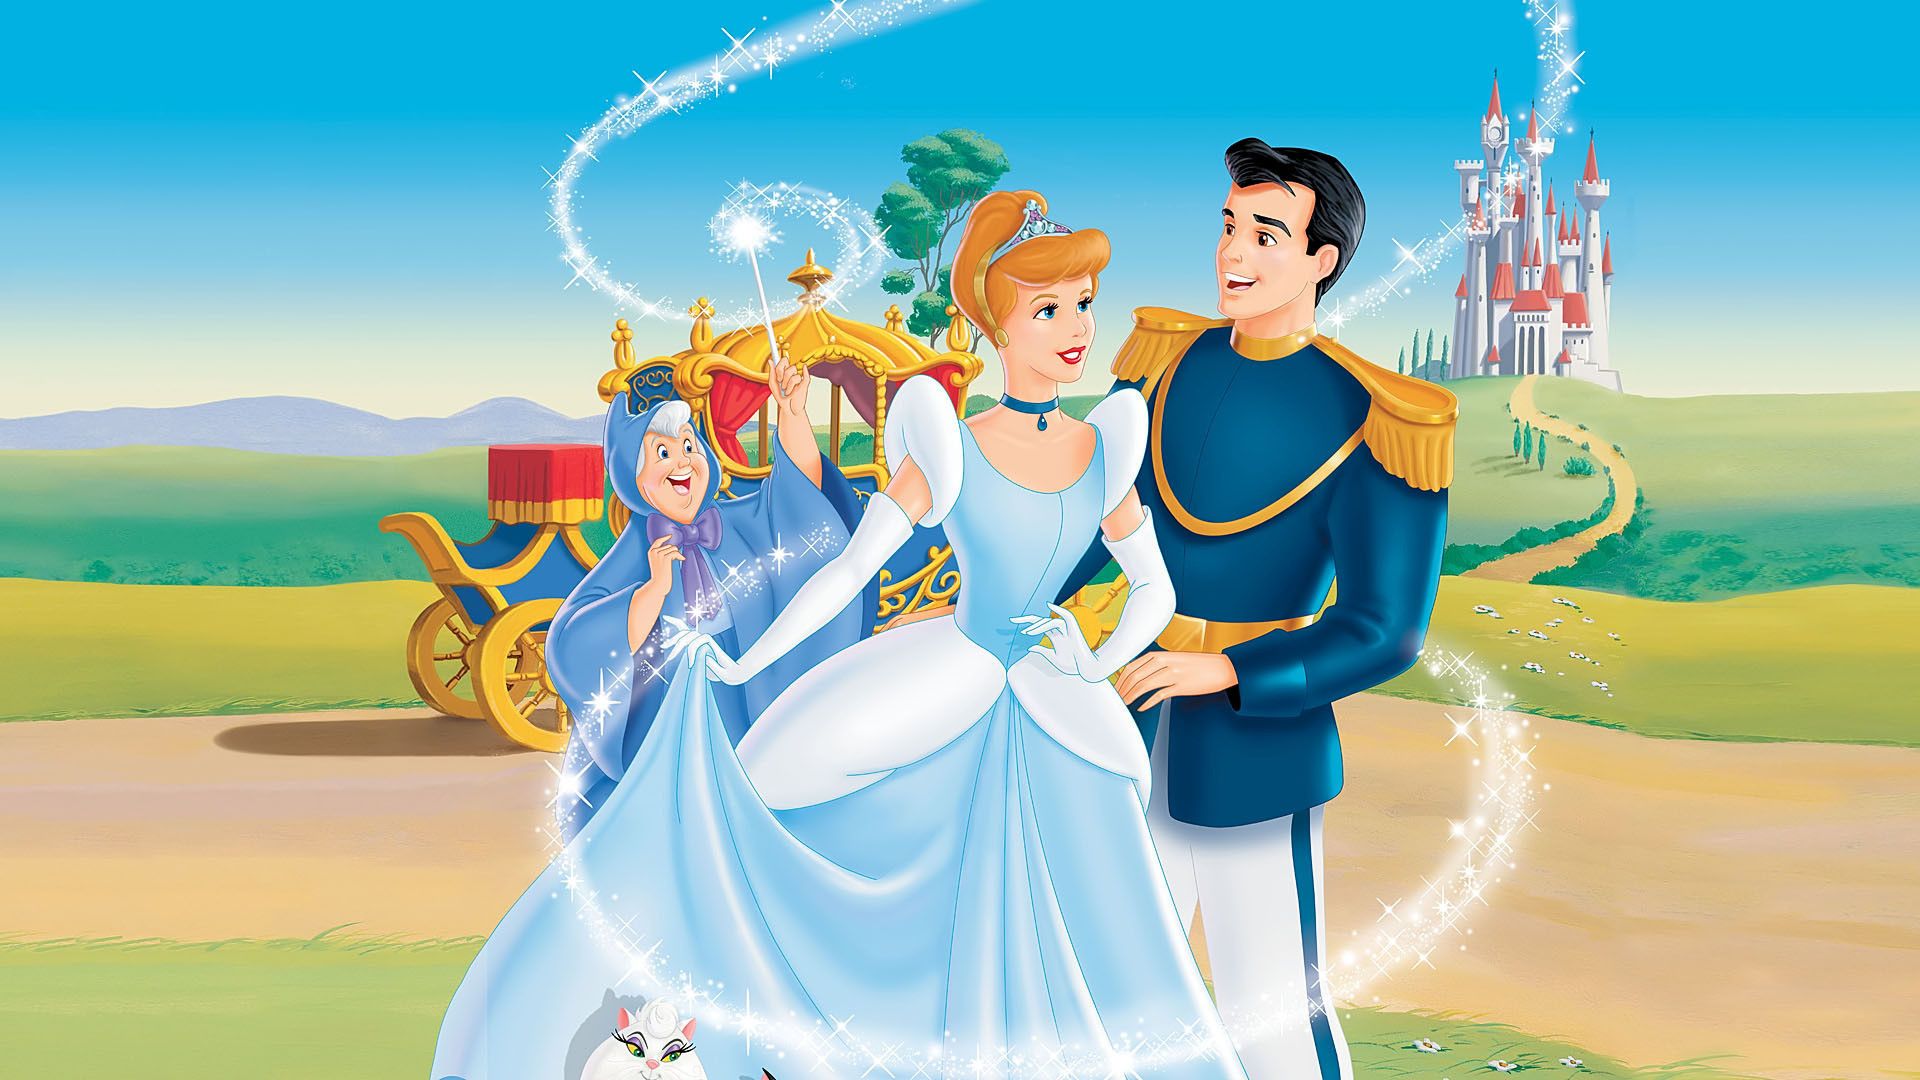 Disney Cinderella Background Pictures For iPhone Cartoons Image